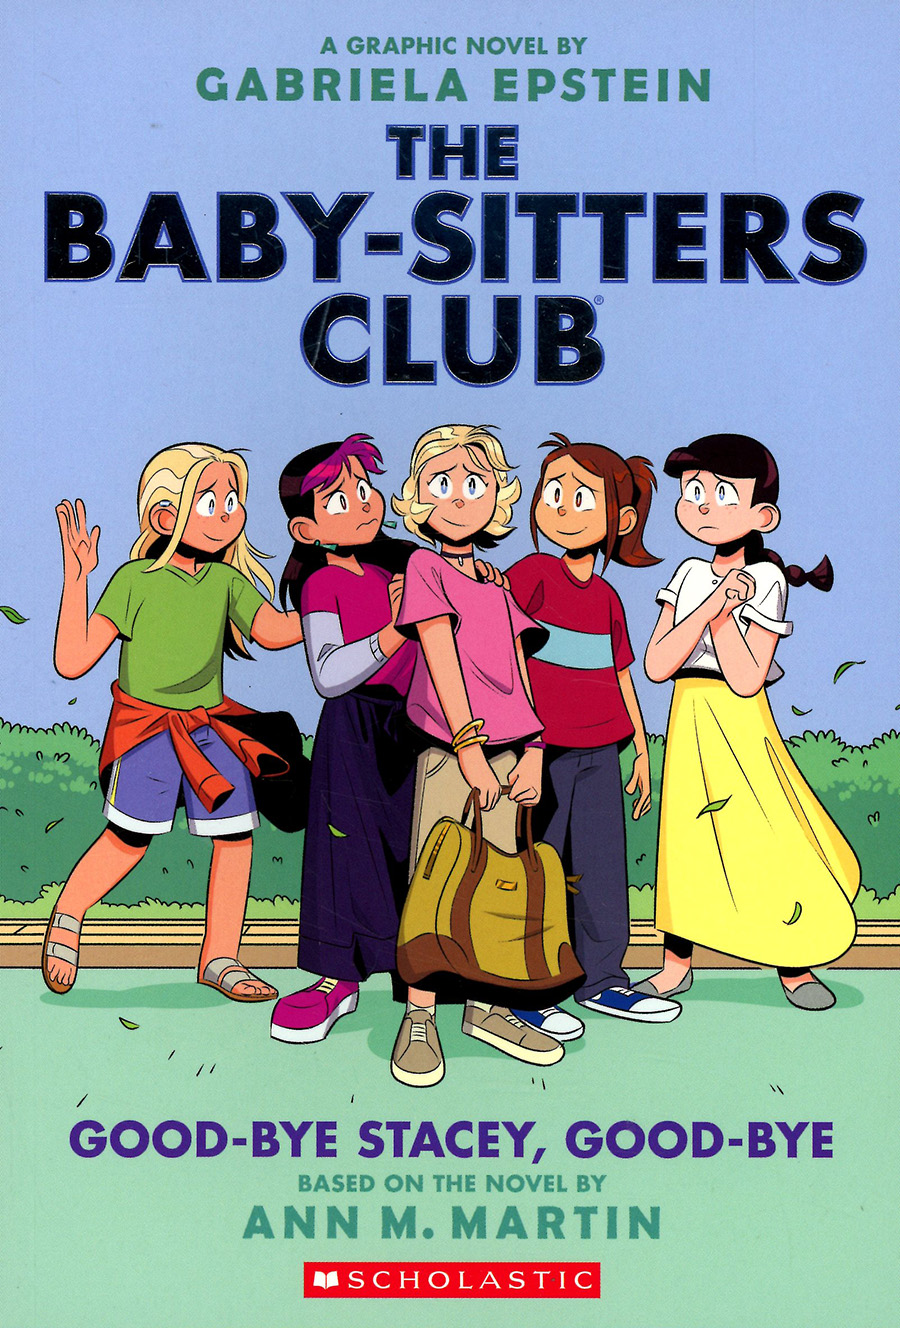 Baby-Sitters Club Color Edition Vol 11 Good-Bye Stacey Good-Bye TP